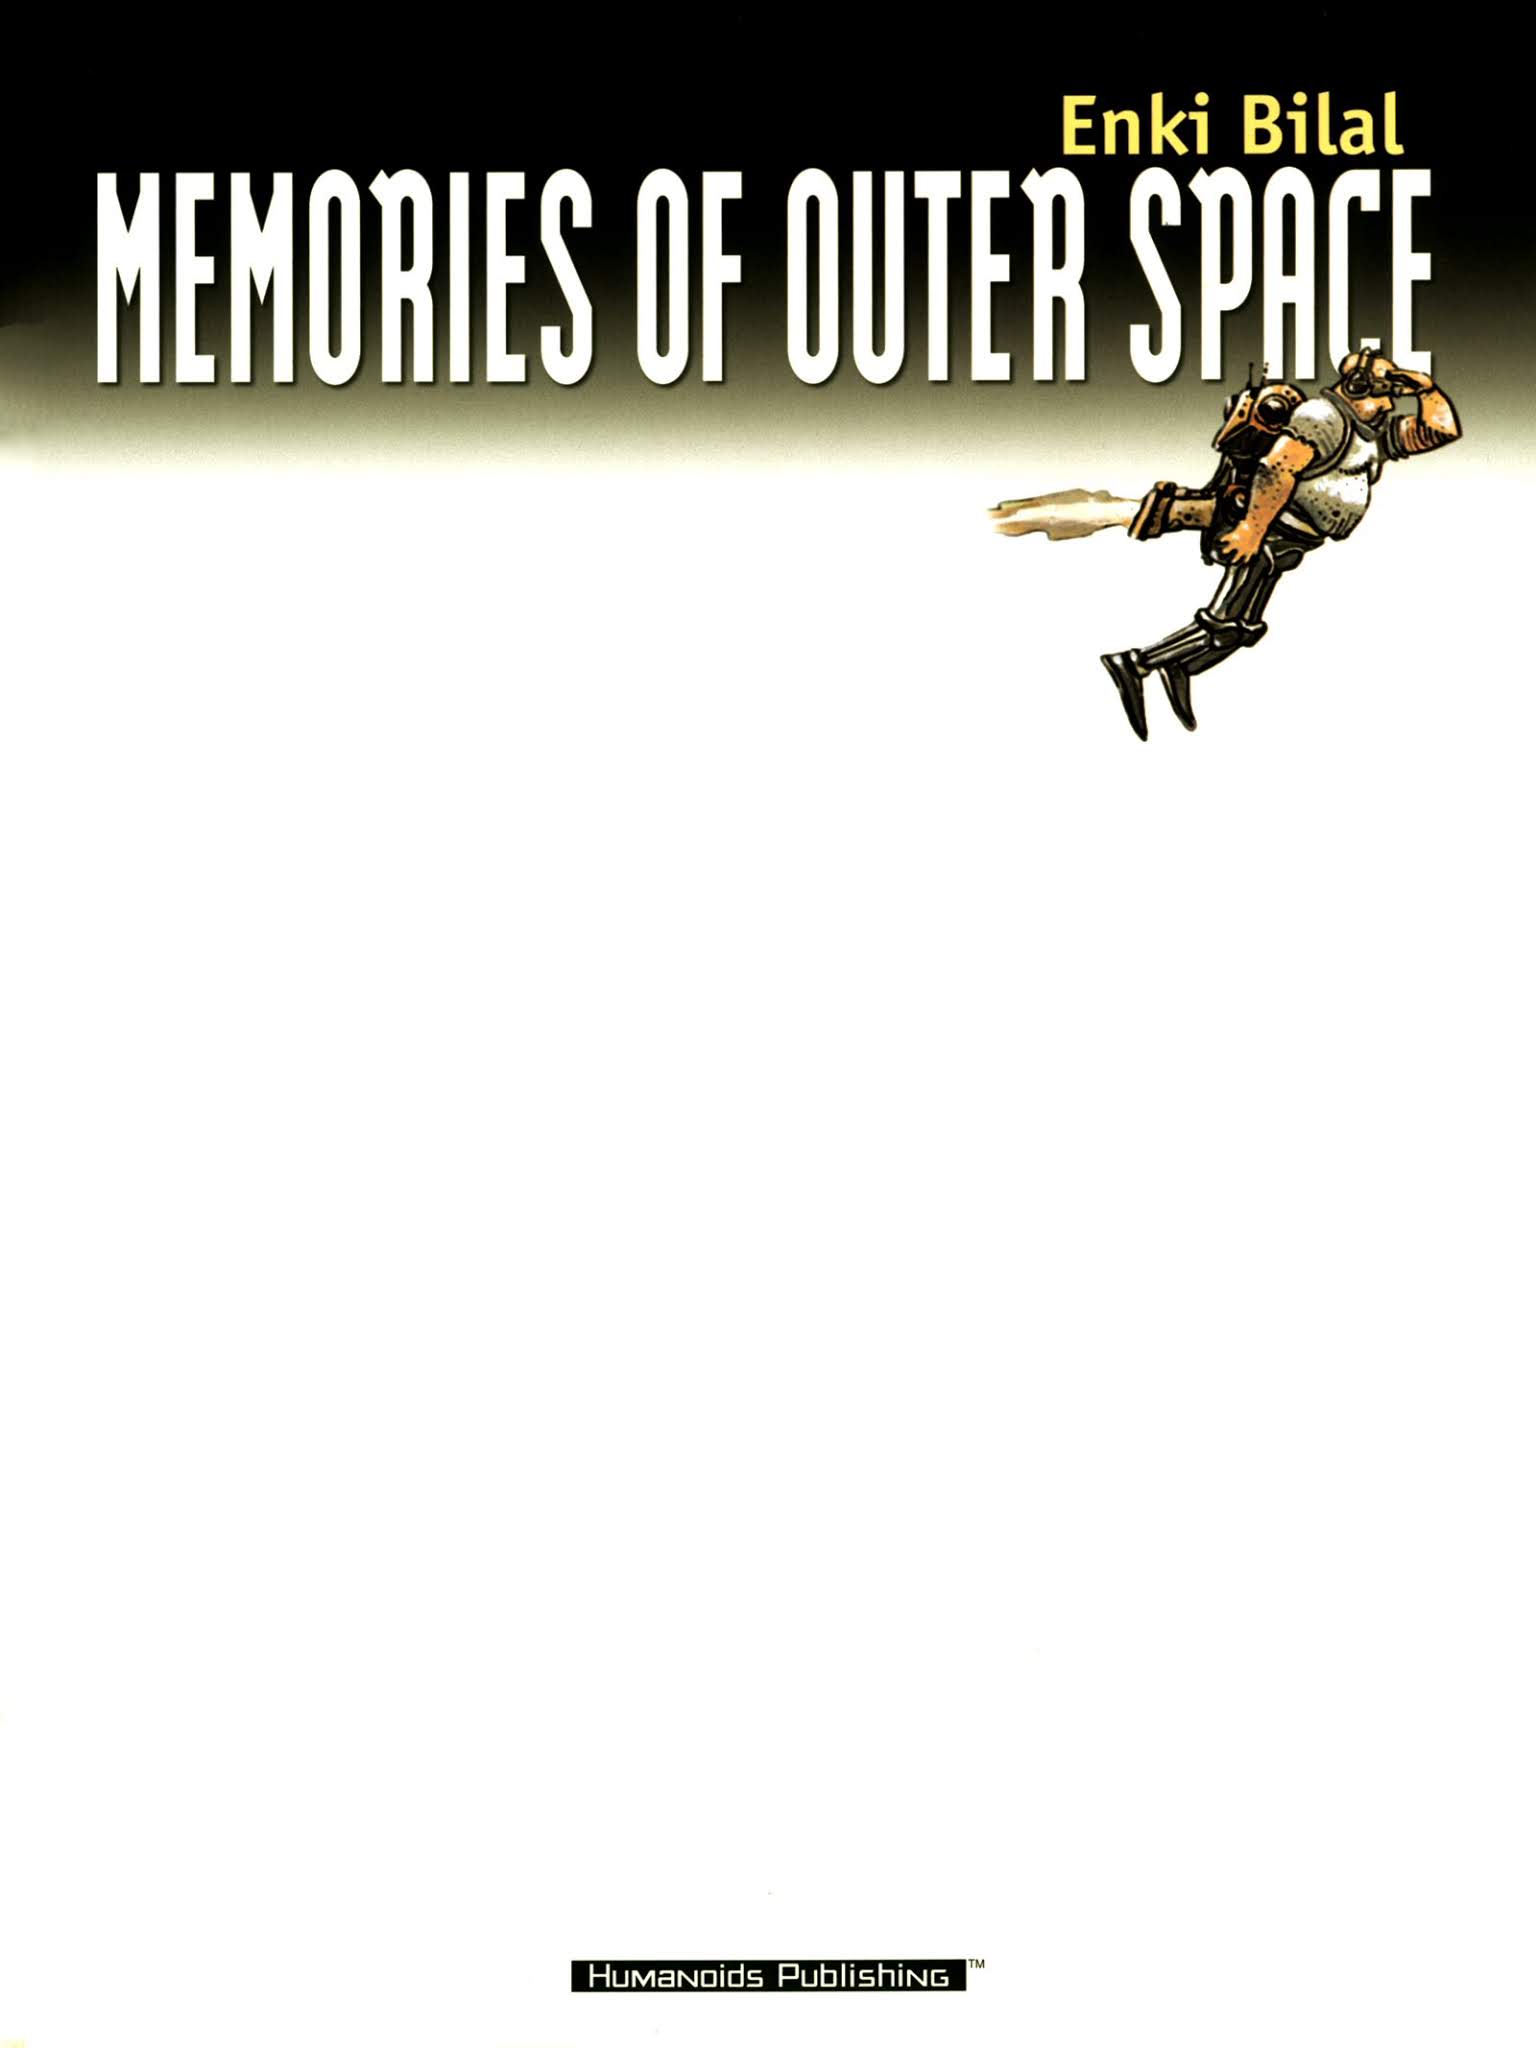 Read online Memories of Outer Space comic -  Issue # TPB - 5